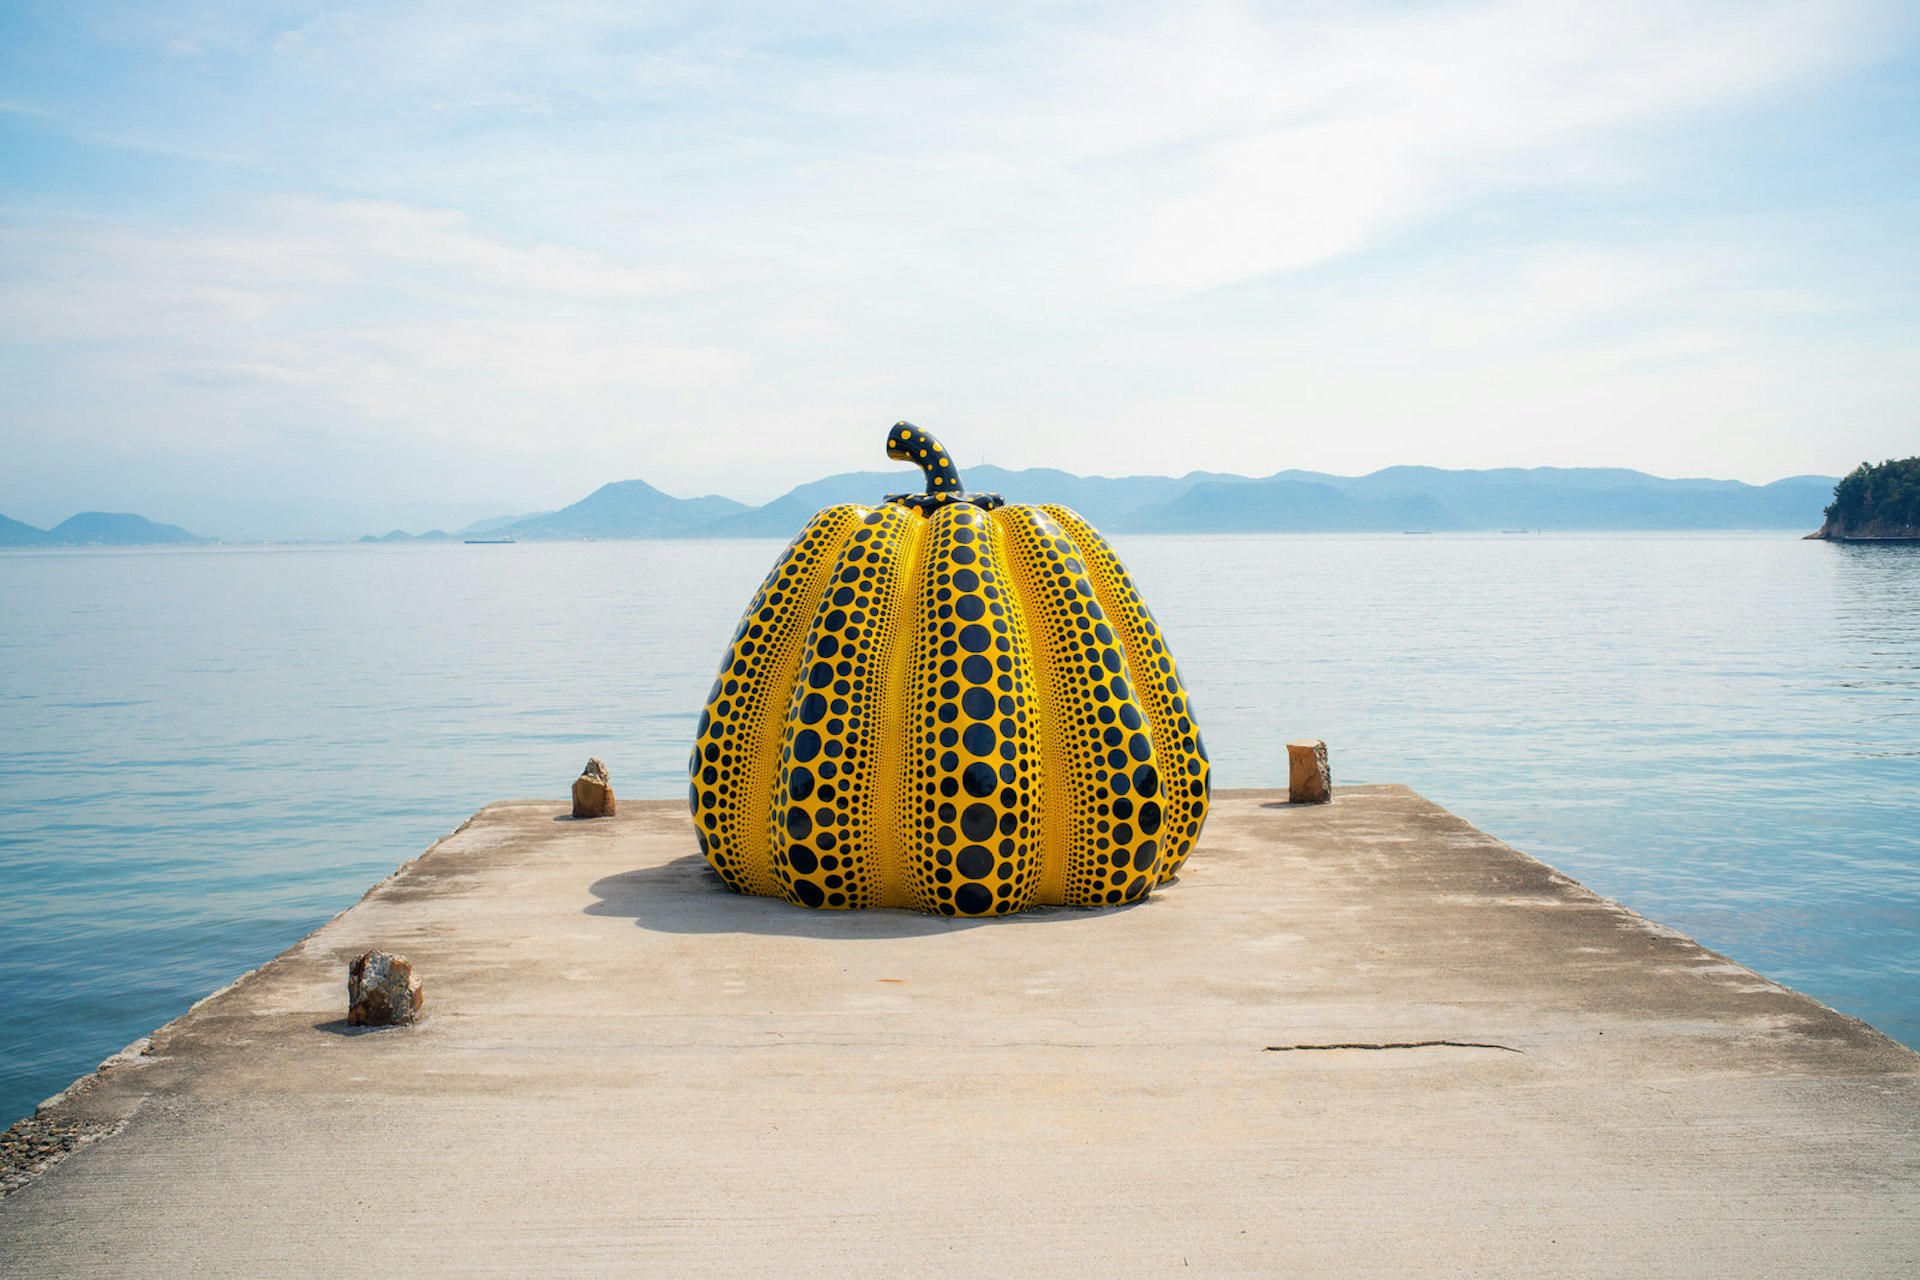 A giant yellow and black pumpkin sculpture by Yayoi Kusama at the end of a concrete jetty in front of the sea in Naoshima, with hilly islands visible in the background